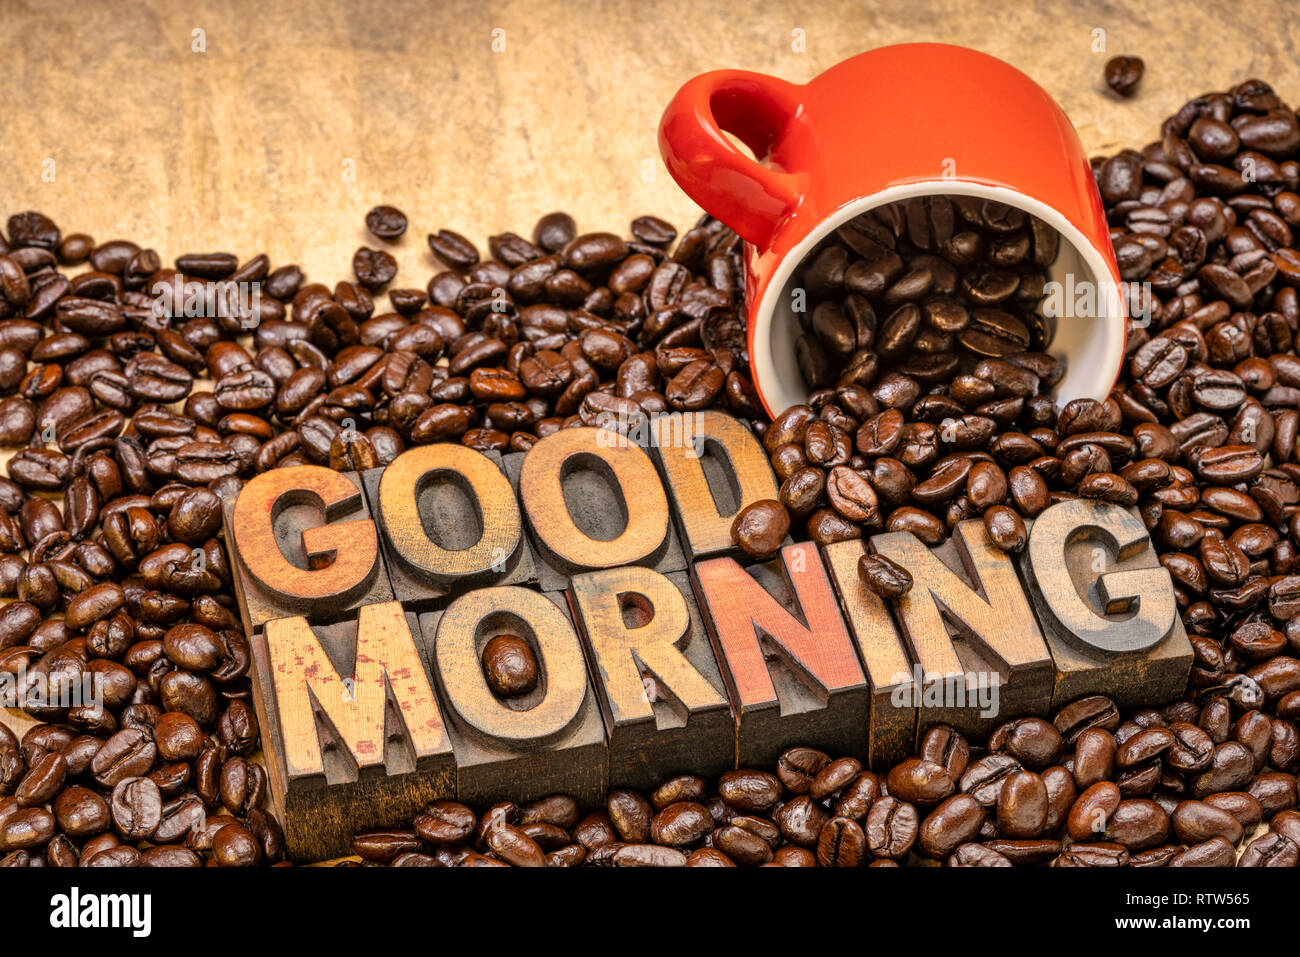 Good Morning - text in vintage letterpress wood type with coffee beans and a cup Stock Photo